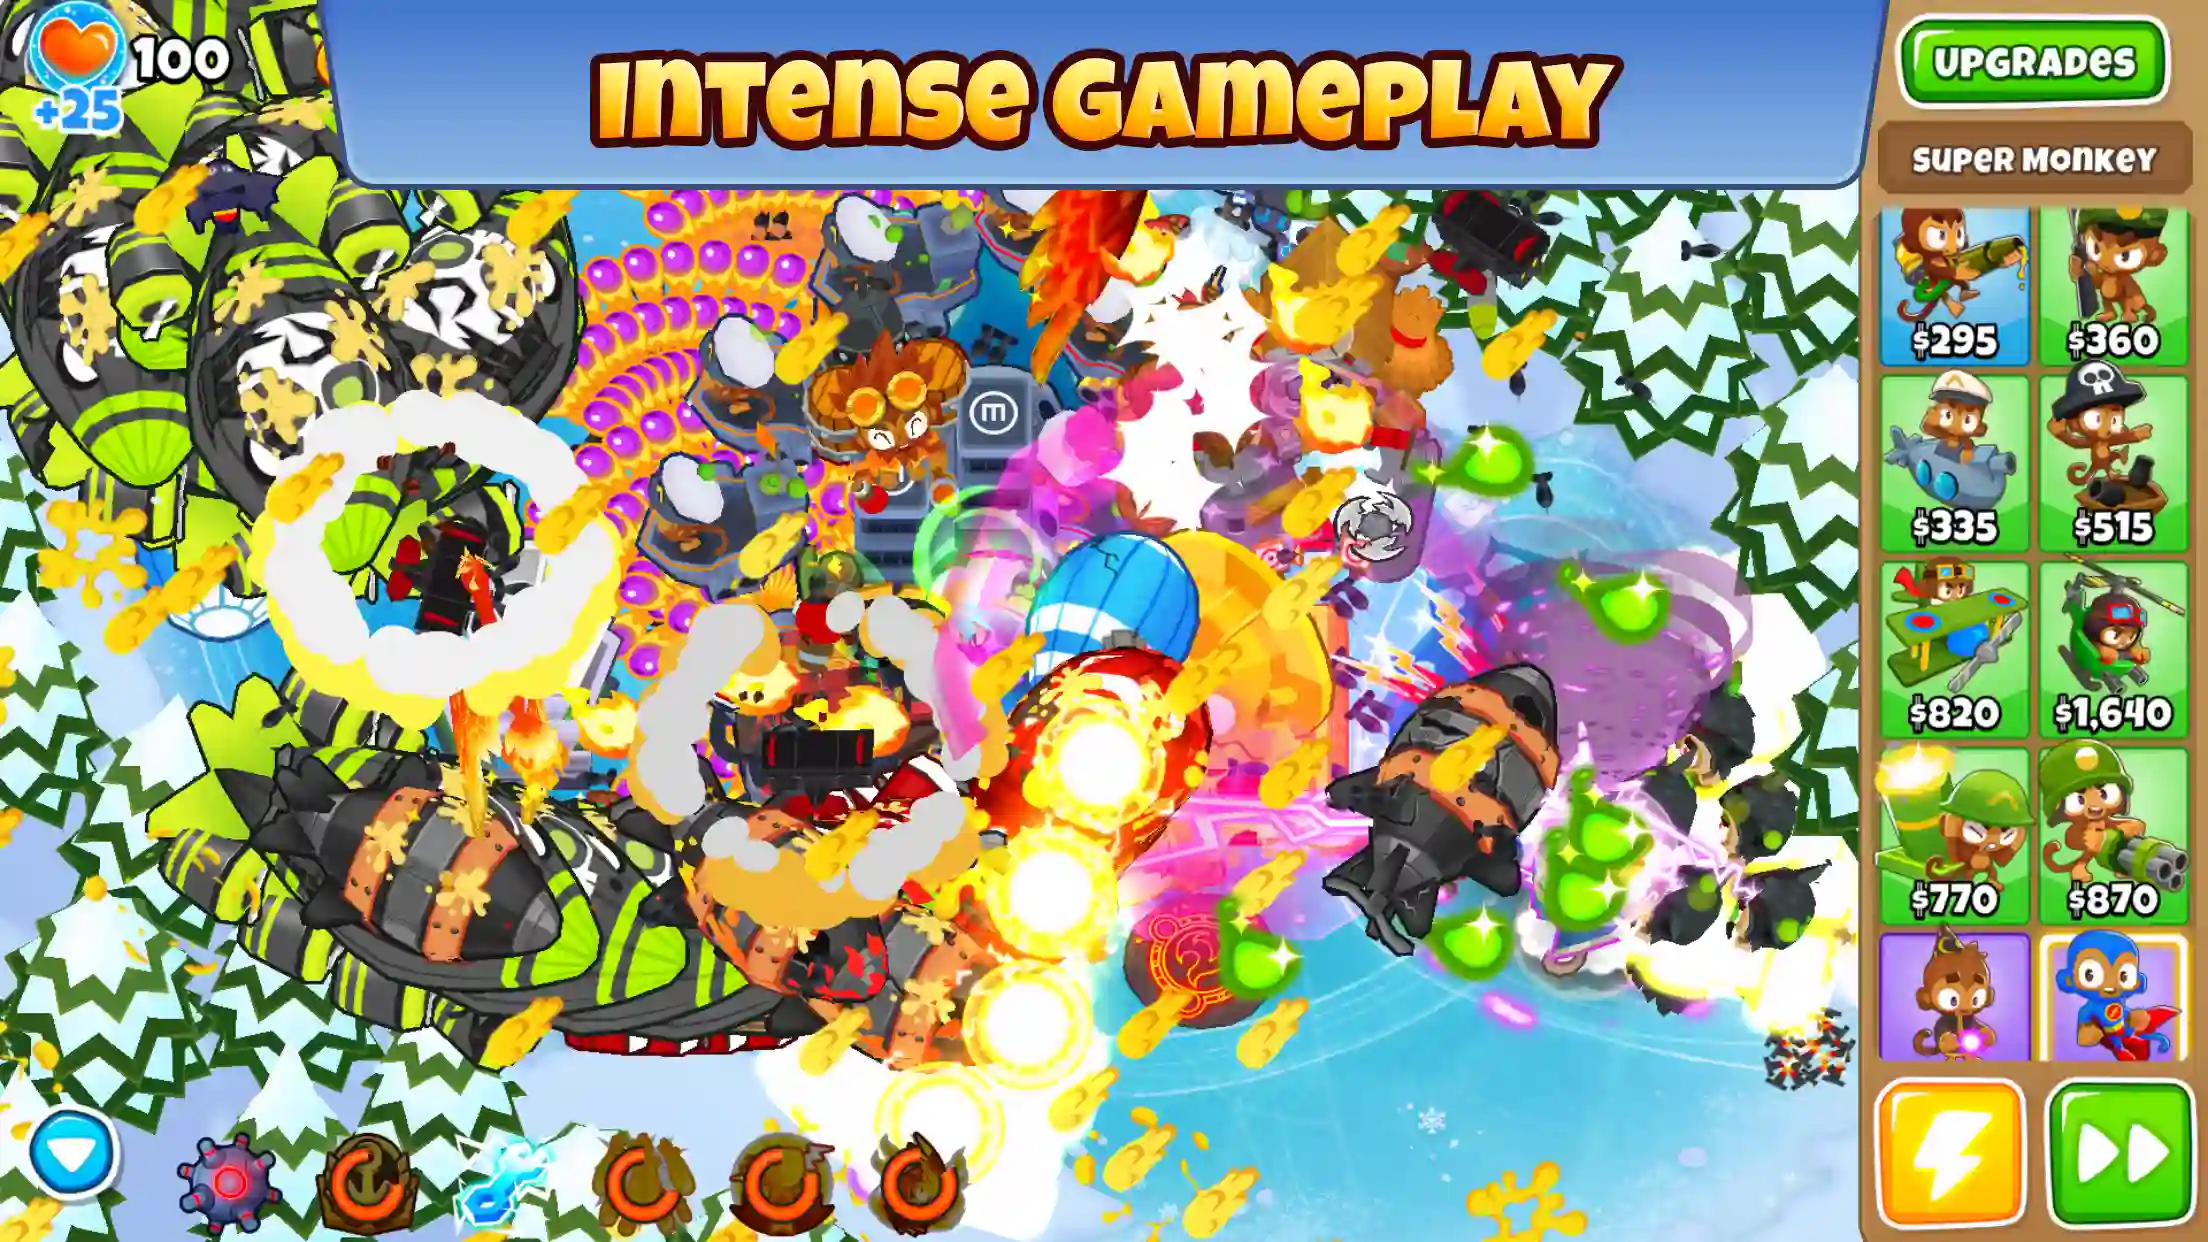 Bloons Td 6 Mod Apk Unlimited Coins